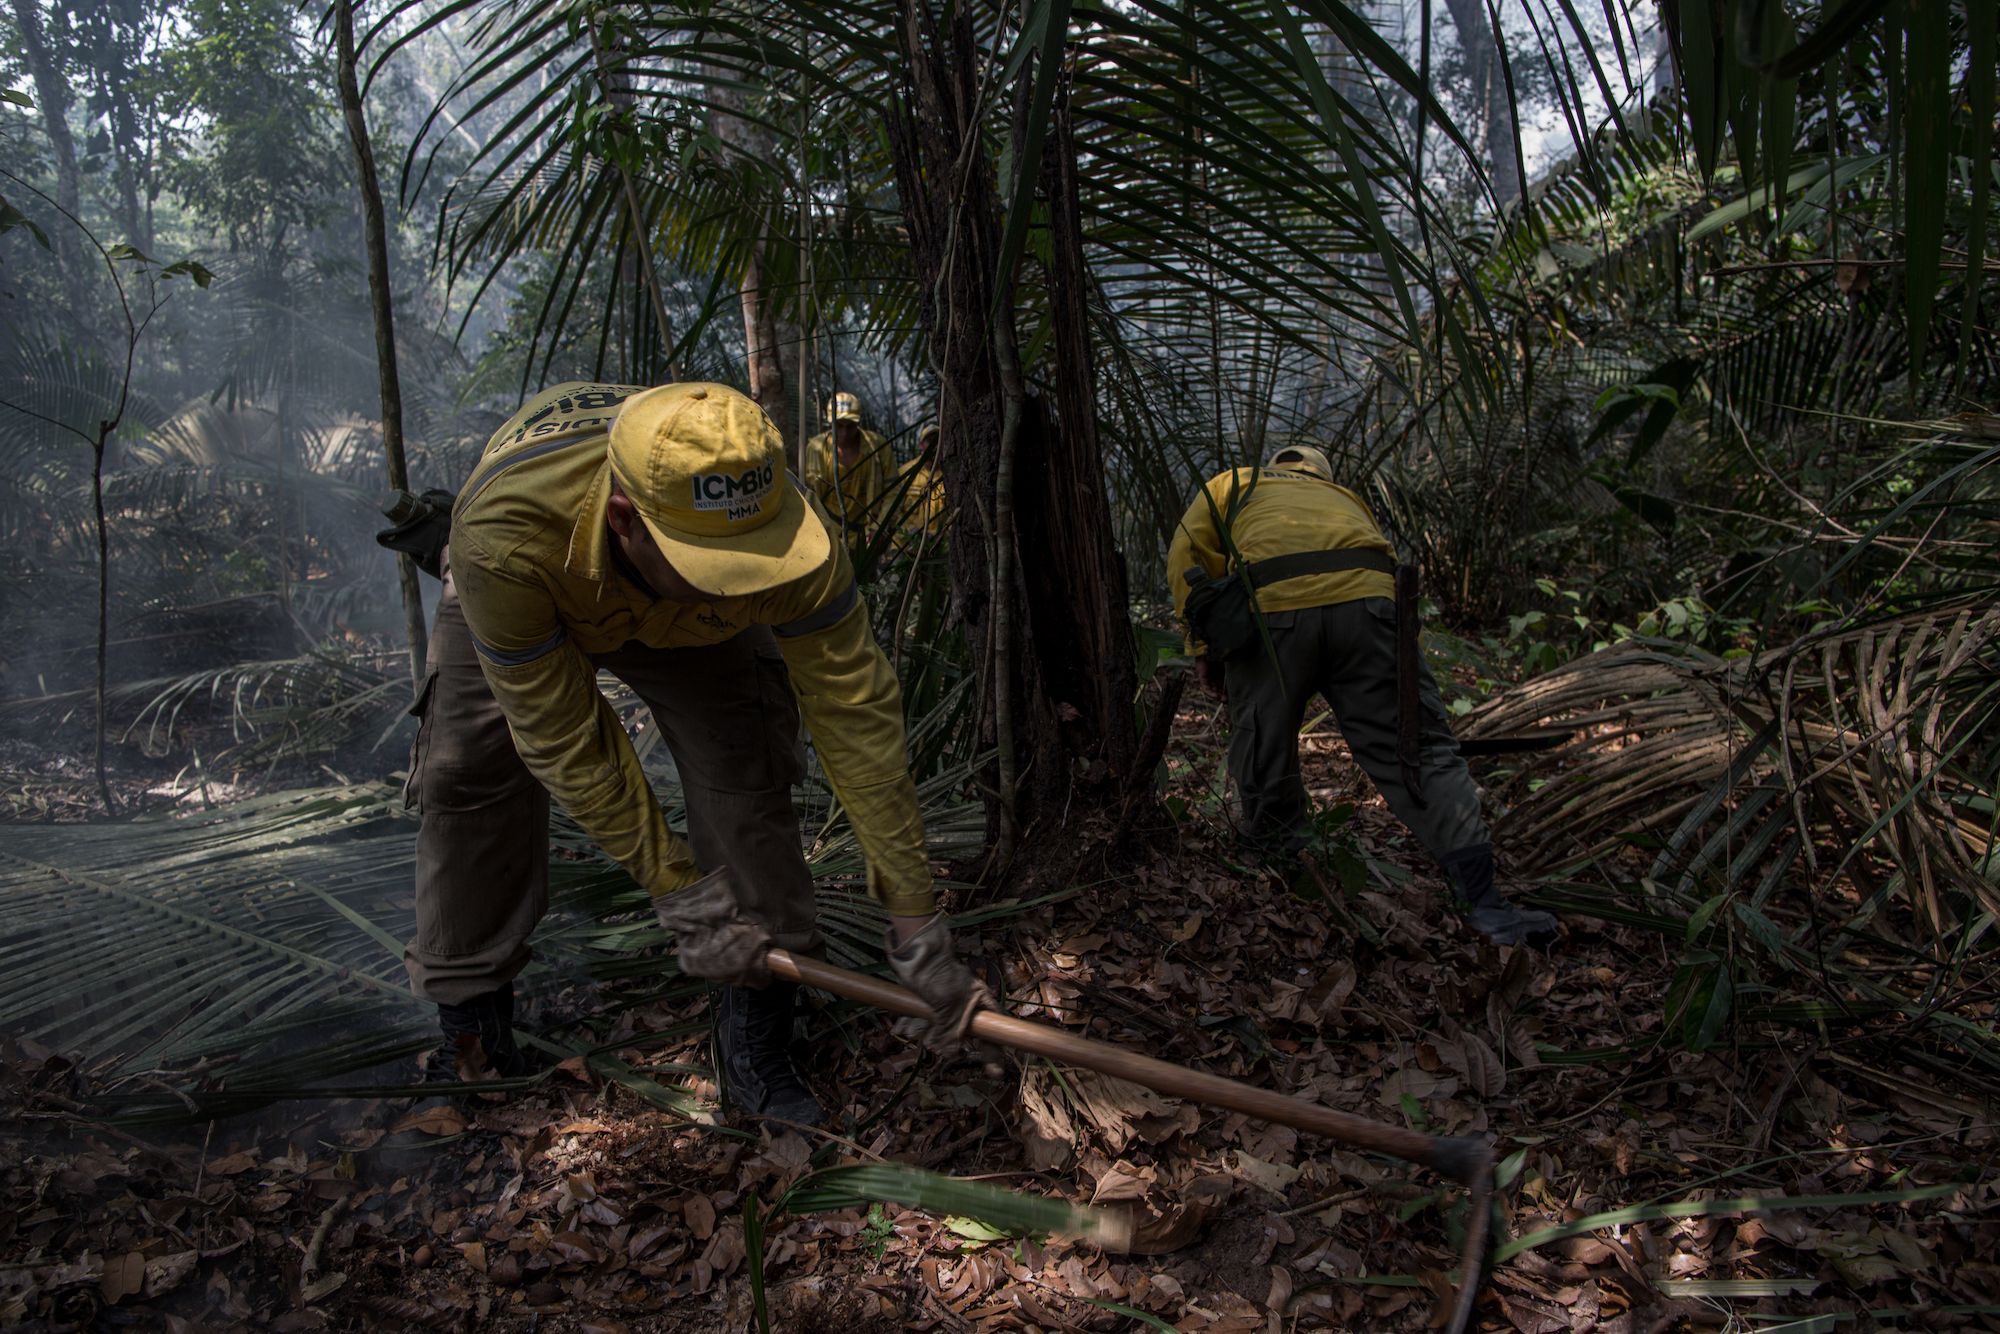 Firefighters from the environment ministry’s ICMBio conservation institute risk their lives entering Tapajós National Forest in search of forest fire hotspots. Image by Flavio Forner. Brazil, undated.
